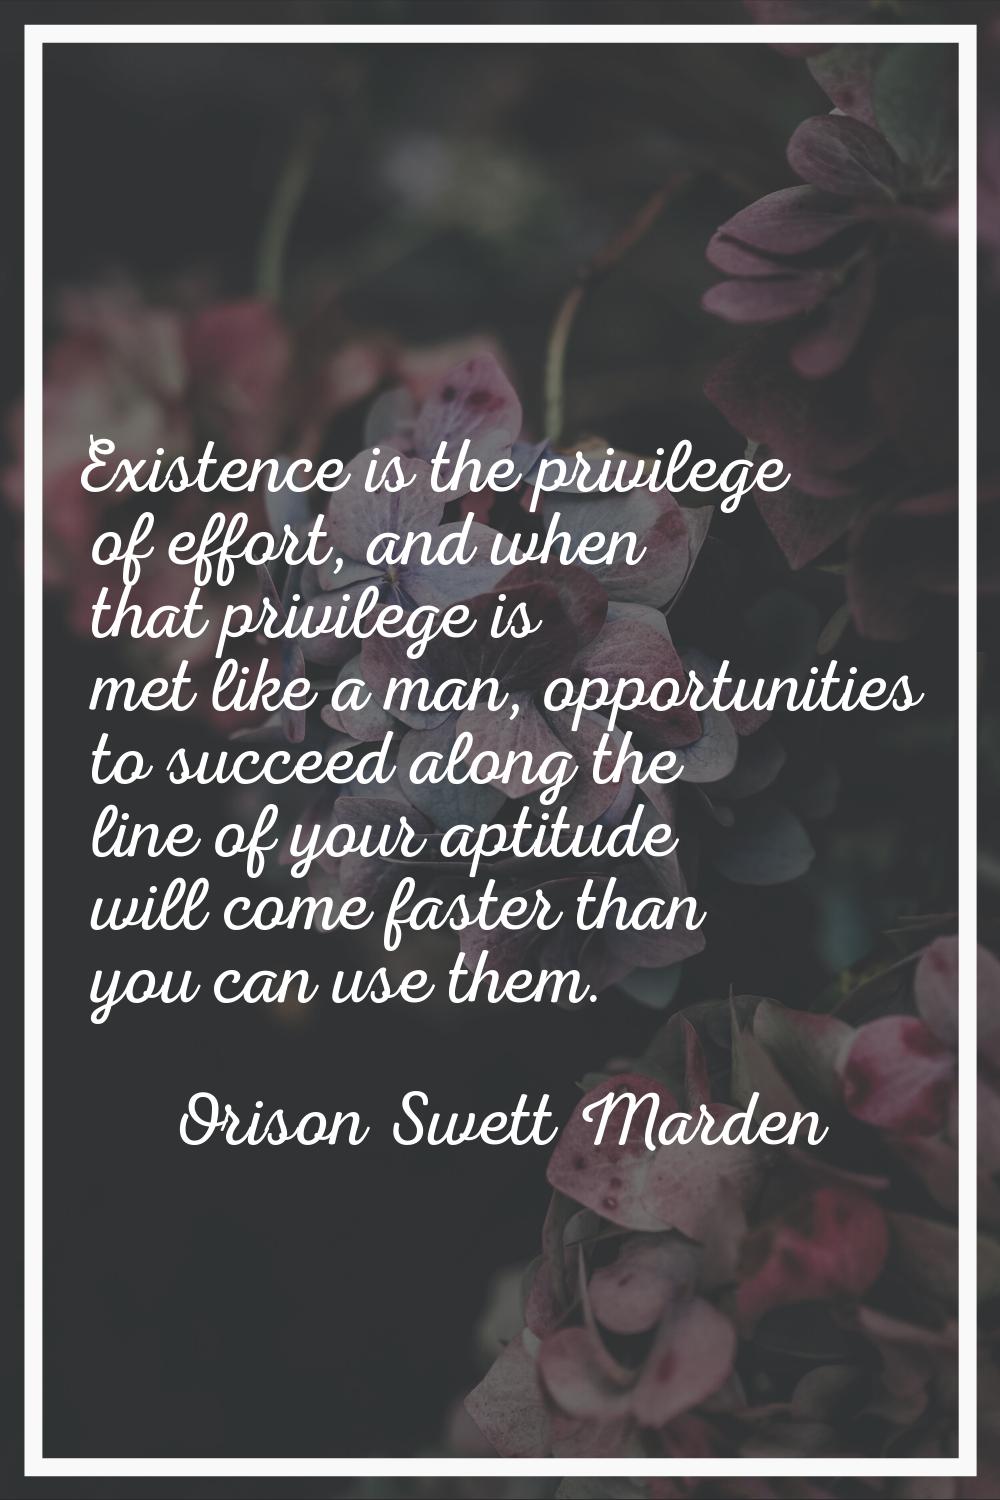 Existence is the privilege of effort, and when that privilege is met like a man, opportunities to s